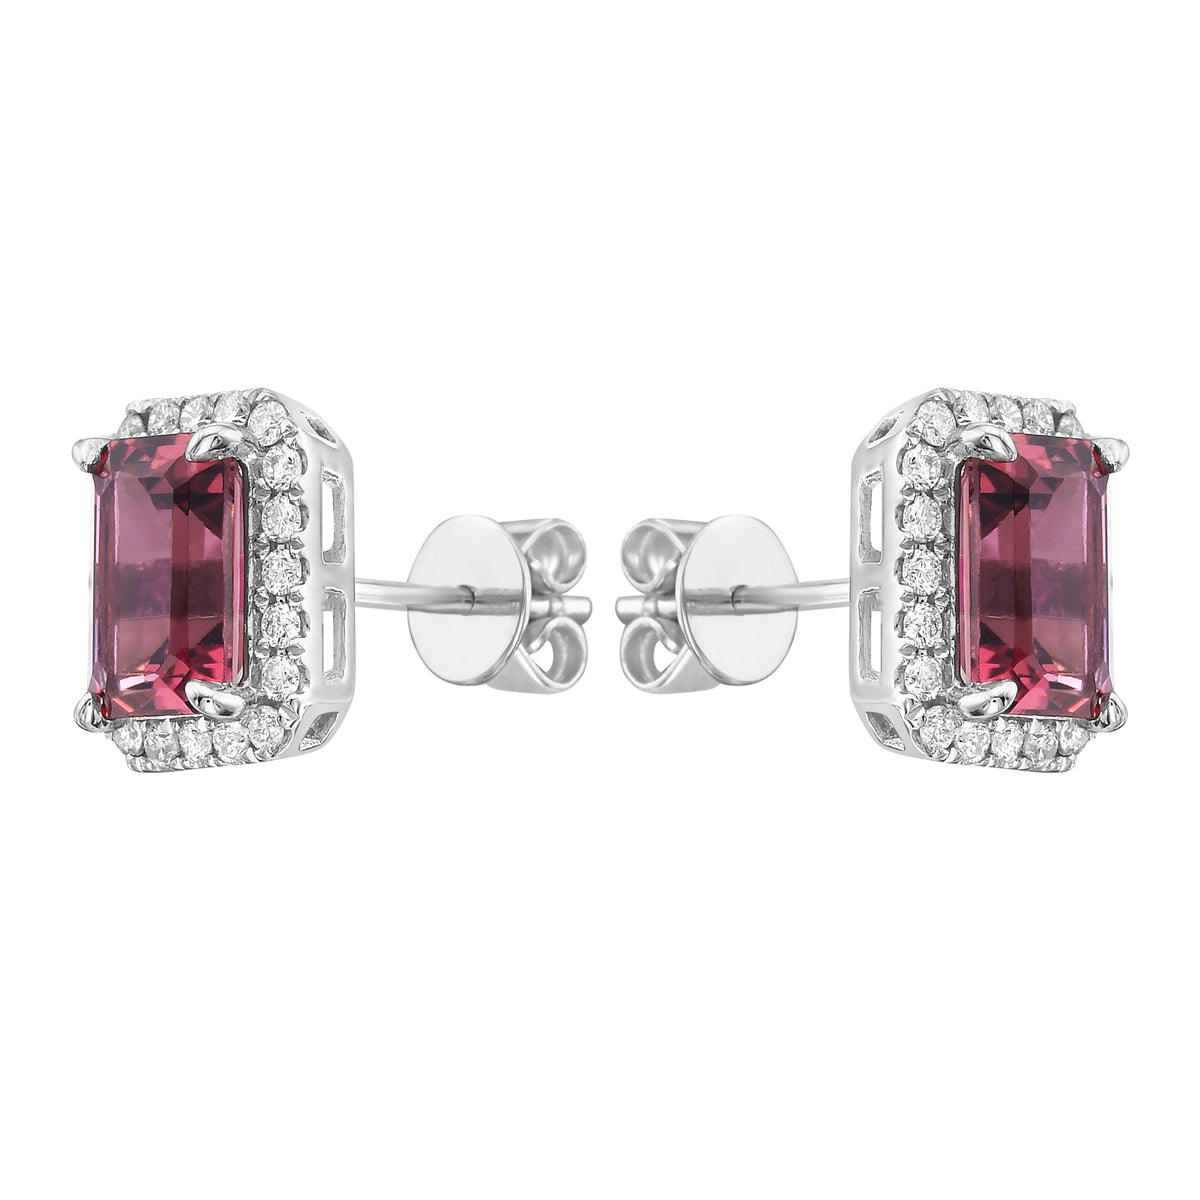 Earrings 14KW/1.8G 2PT-2.07CT 40RD-0.26CT Pink Tourmaline